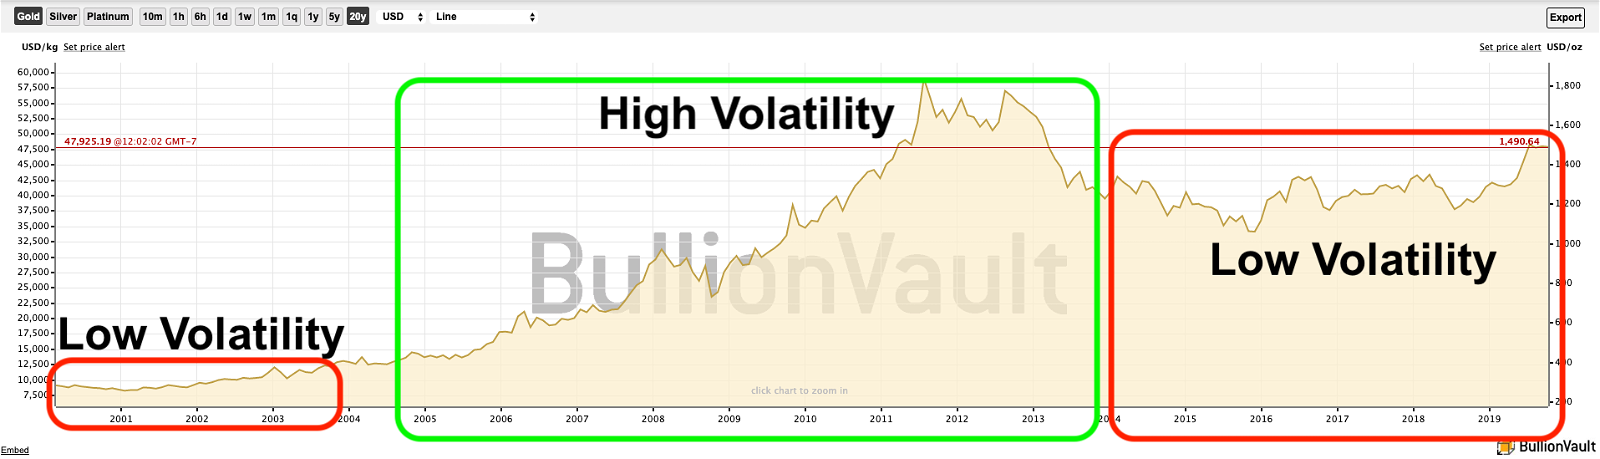 Chart of Gold Displaying High and Low Volatility Periods